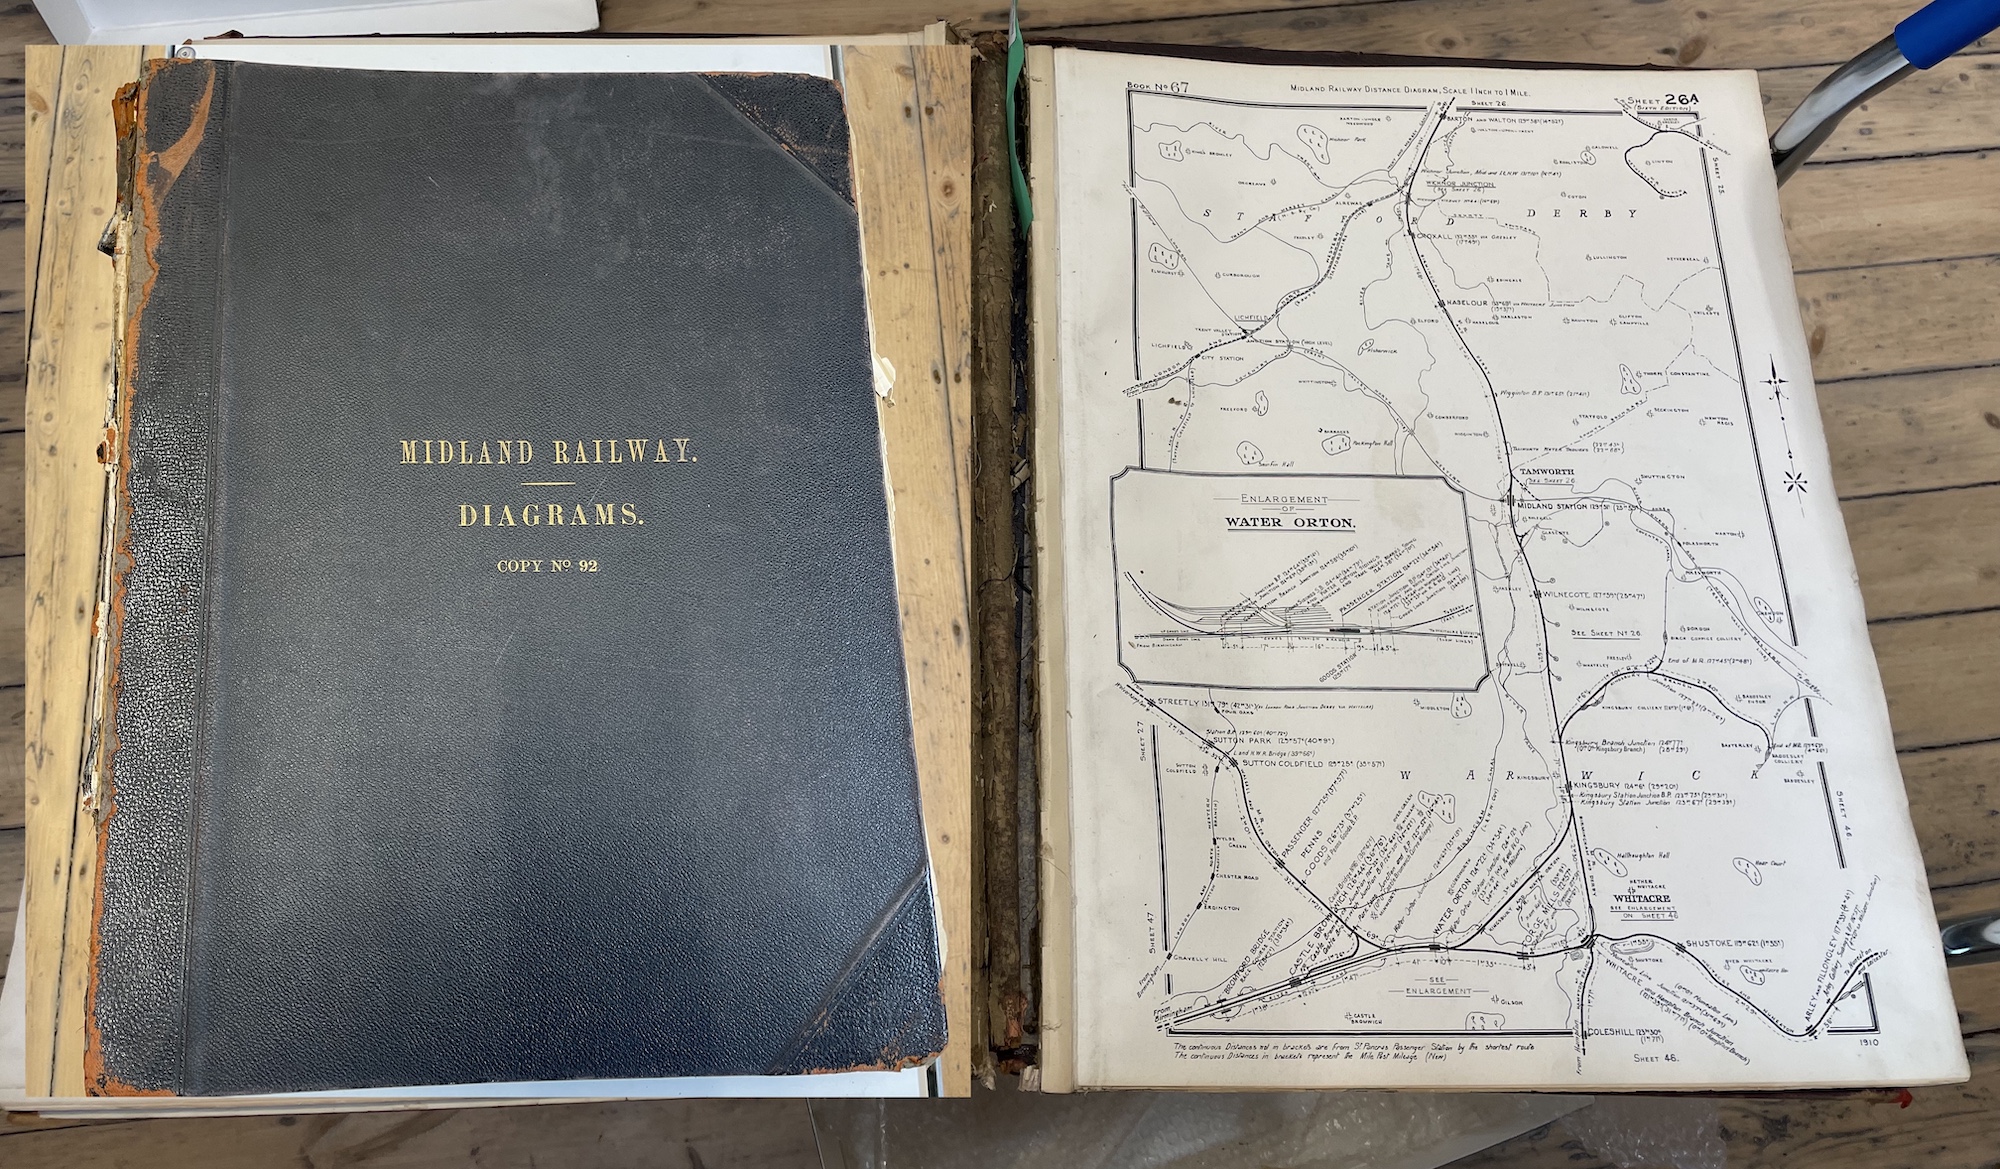 A large ledger with a map sheet showing part of the Midland Railway network on the right, with inset on the left, a gilt inscribed cover reading MIDLAND RAILWAY. DIAGRAMS. COPY NO 92